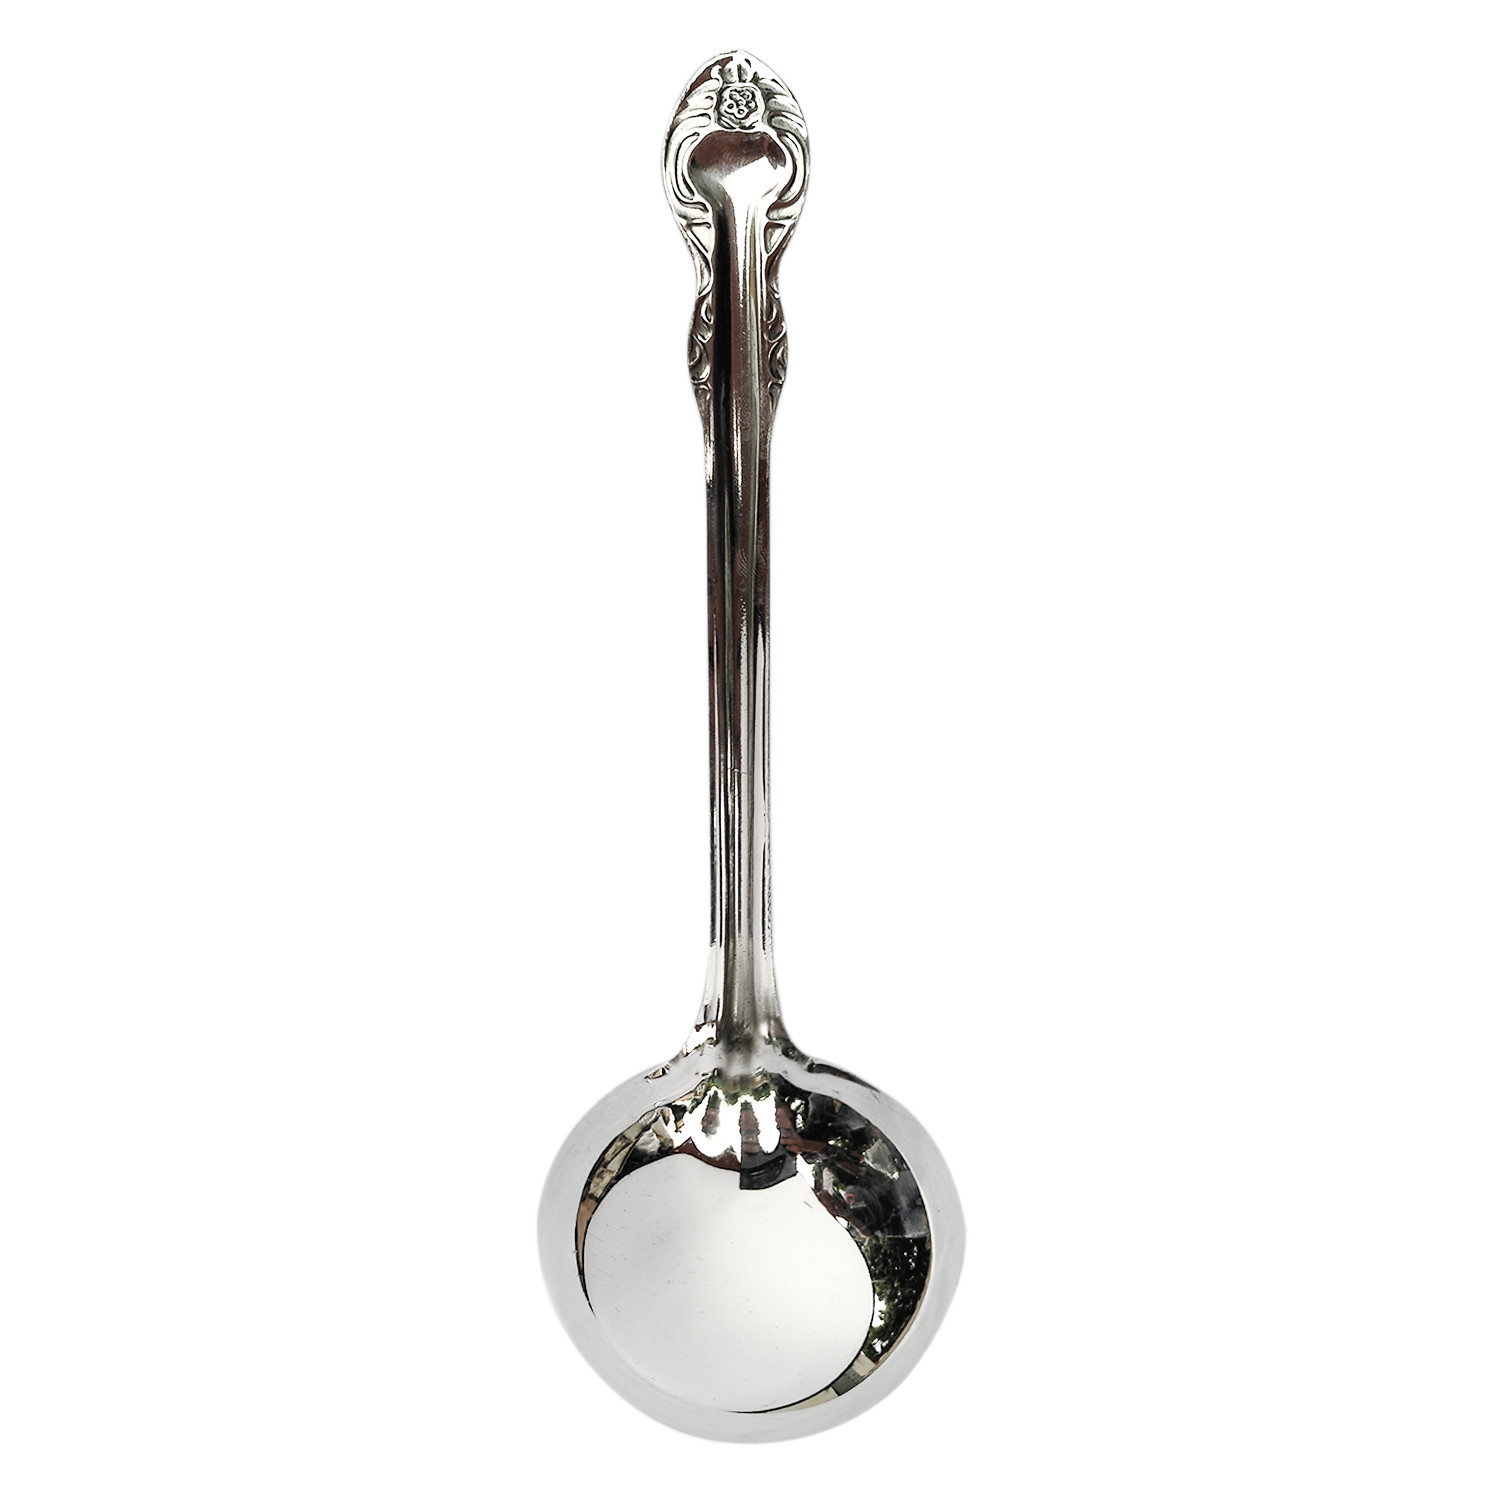 Kuber Industries Stainless Steel Serving Spoon For Dining Table & Kitchen (Silver)